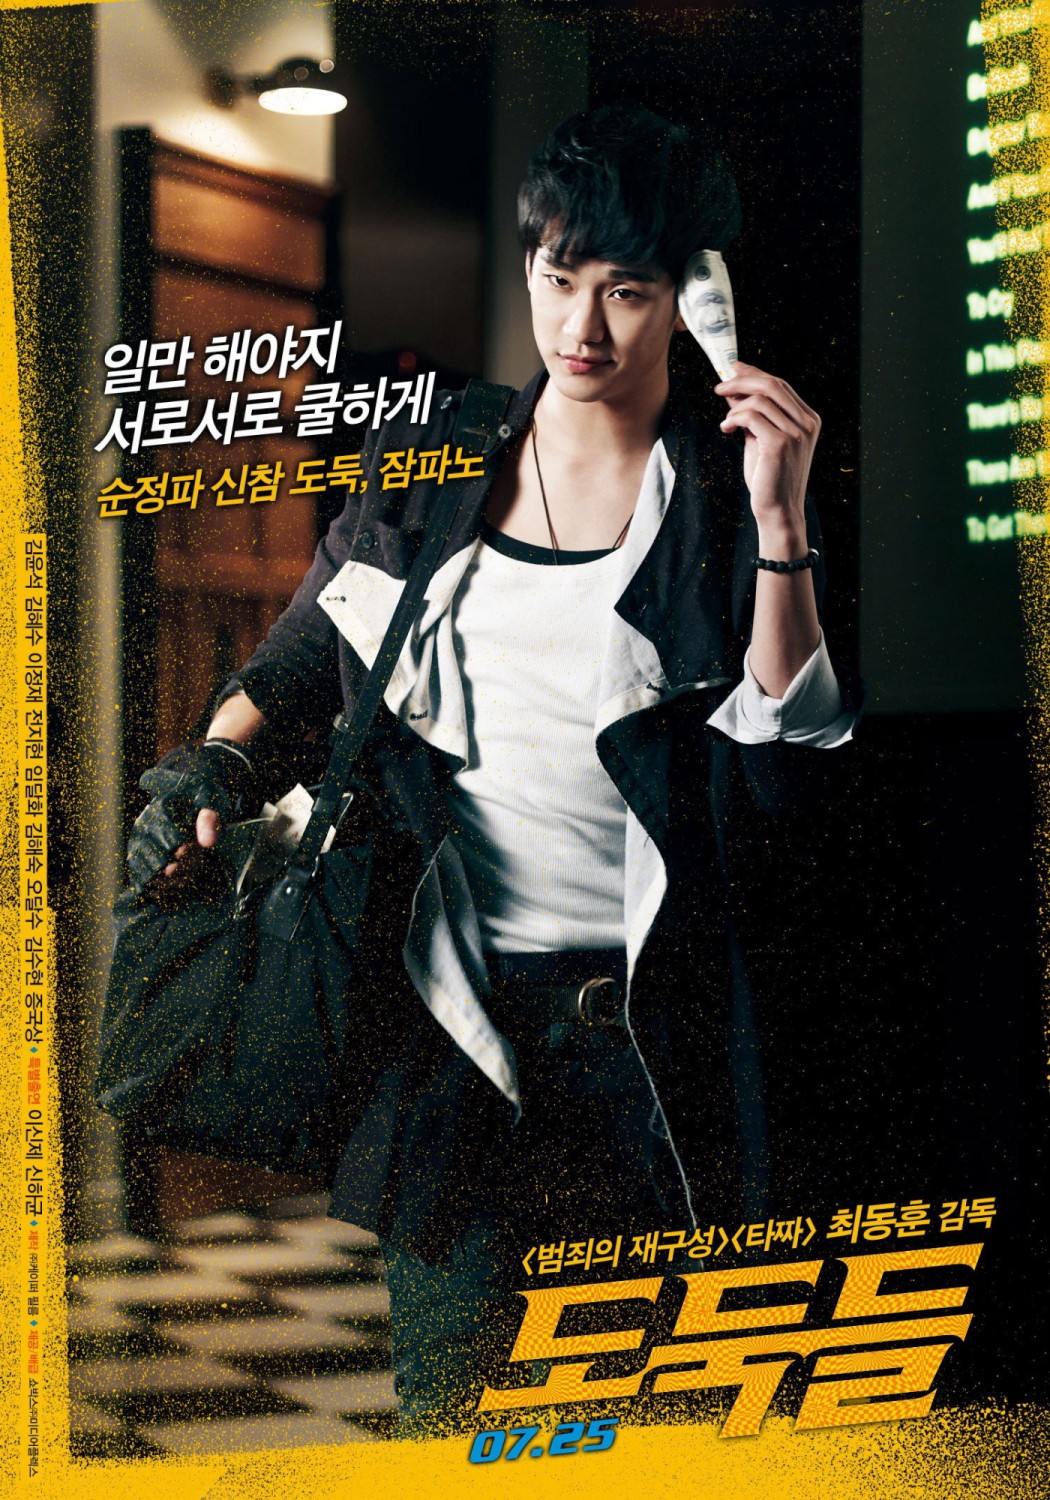 Extra Large Movie Poster Image for Dodookdeul (#9 of 9)